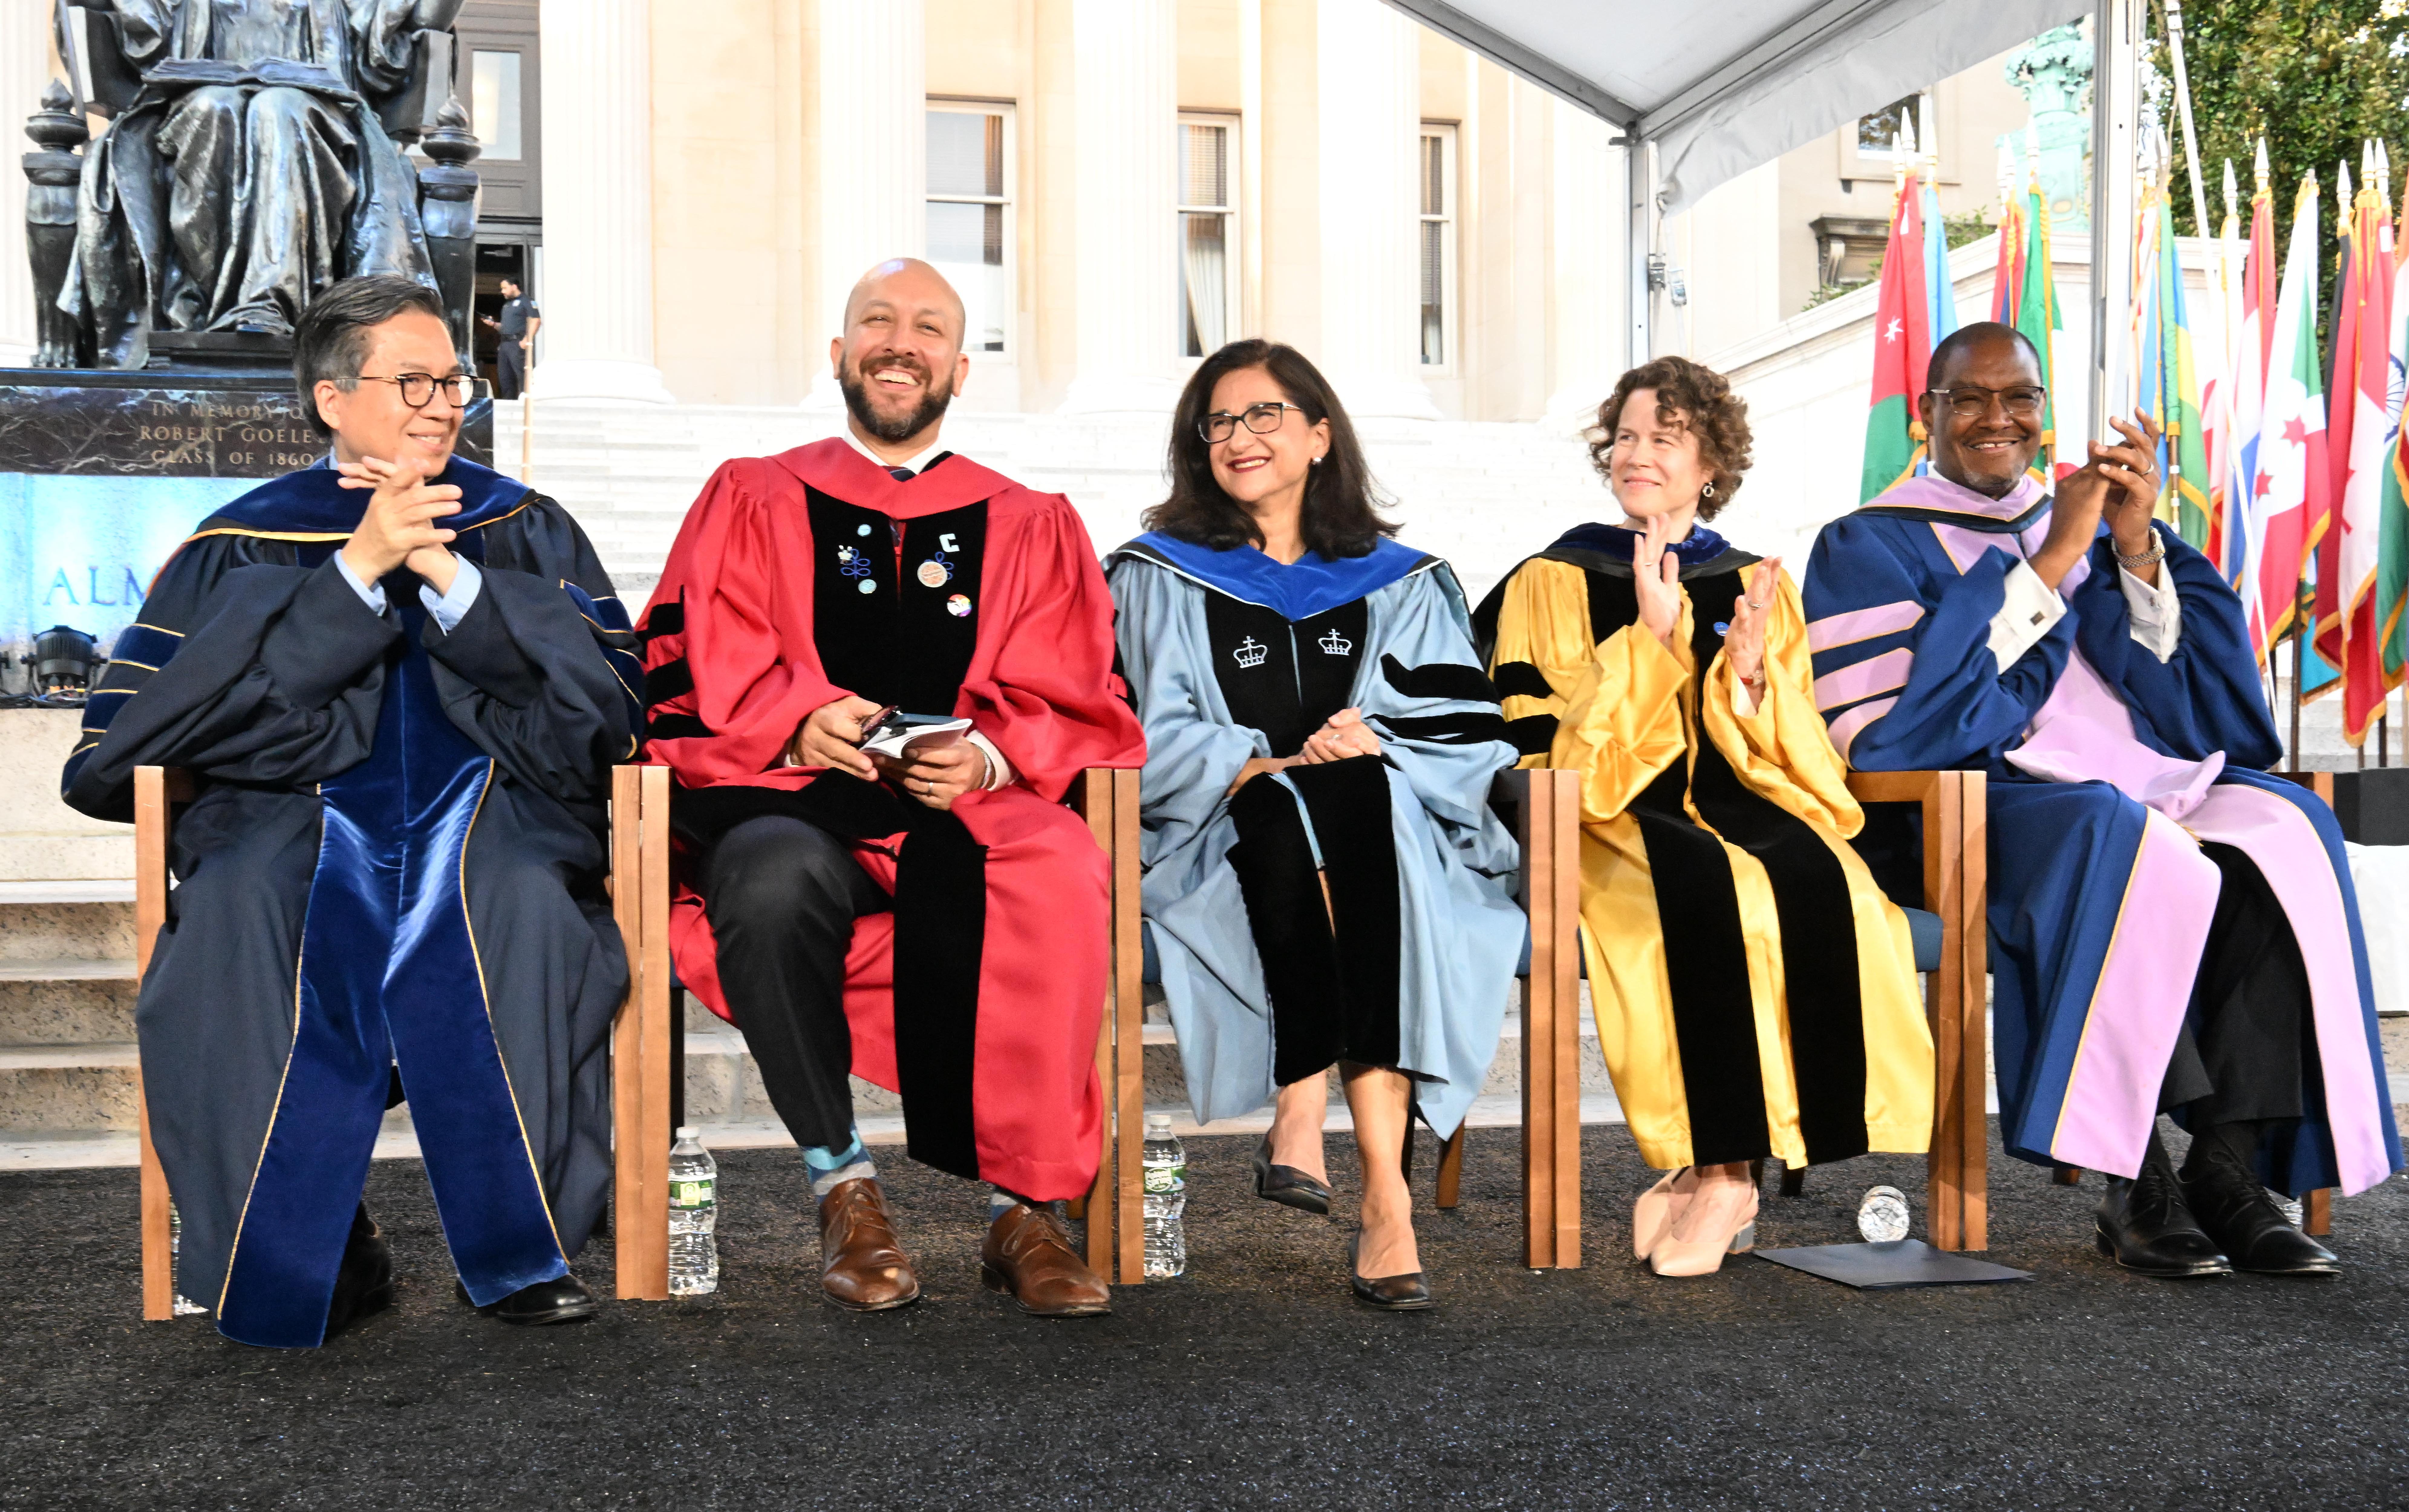 . On the podium (left to right): Engineering Dean Shih-Fu Chang, College Dean Josef Sorett, President Minouche Shafik, Executive Vice President and Dean of the Faculty of Arts and Sciences Amy Hungerford and interim University Provost Dennis A. Mitchell.